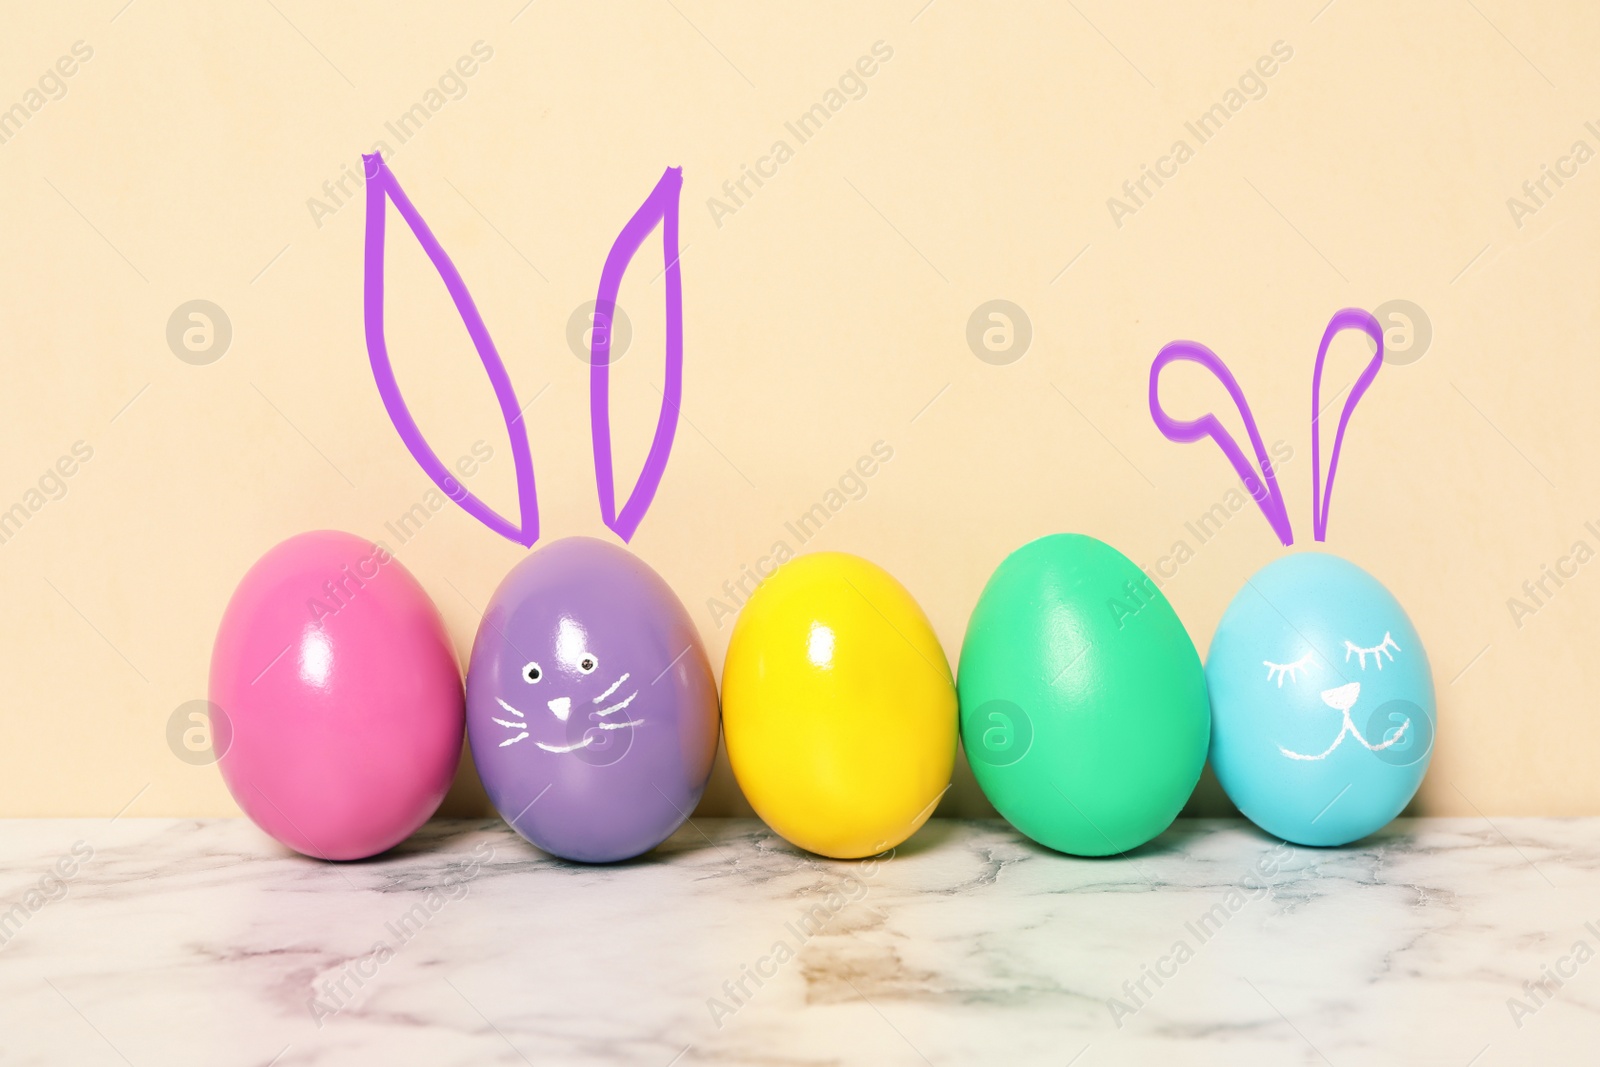 Image of Two eggs with drawn faces and ears as Easter bunnies among others on white marble table against beige background